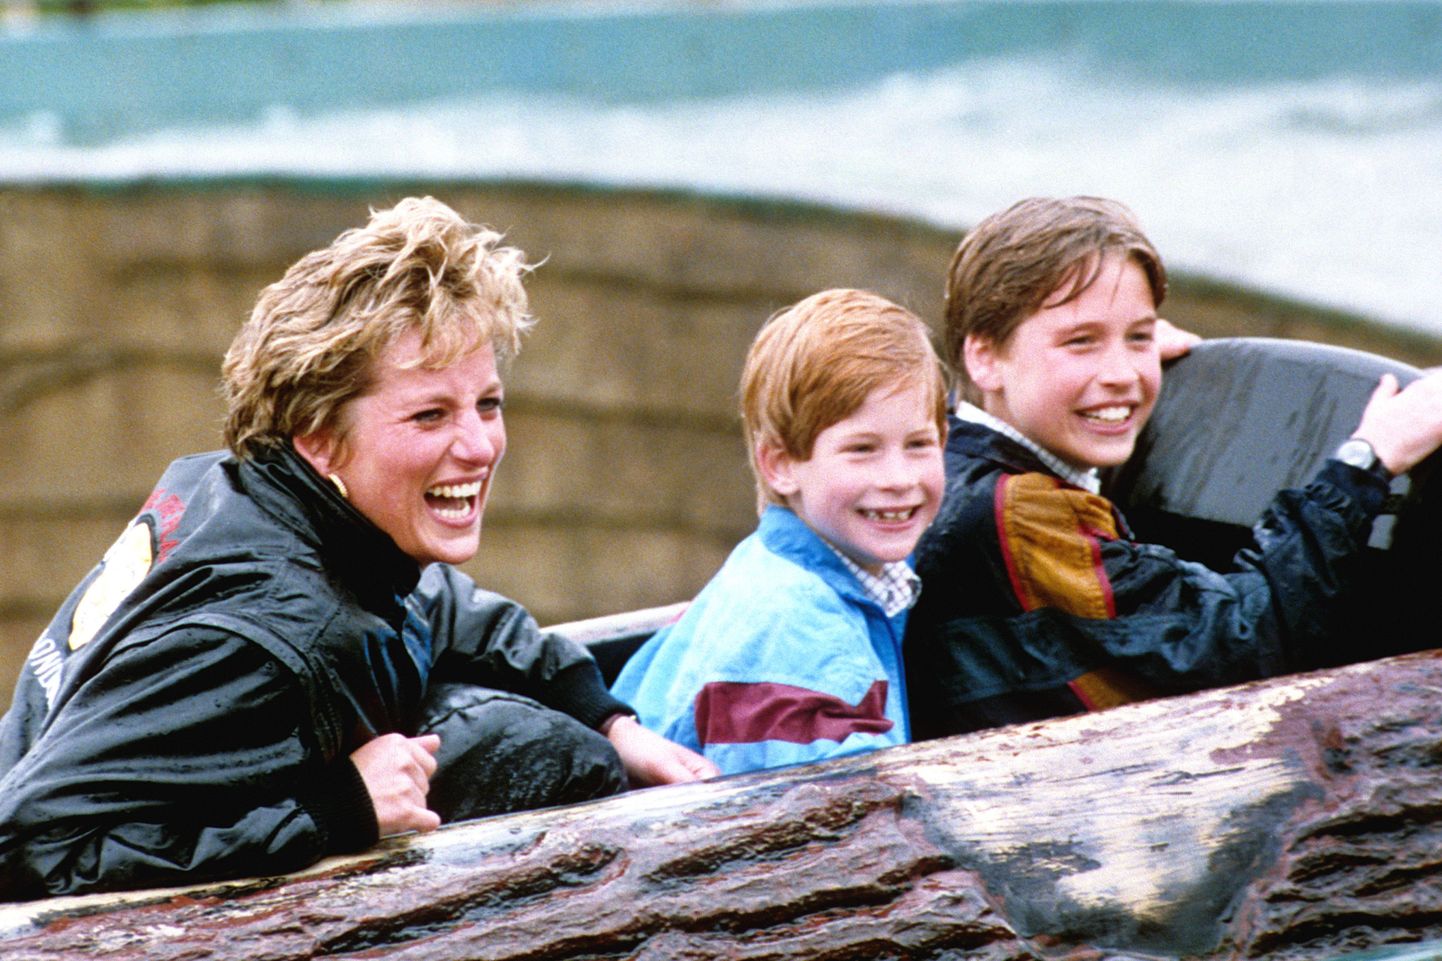 Diana, Princess of Wales, with sons Prince William (r) and Prince Harry during a visit to 'Thorpe Park' amusement park